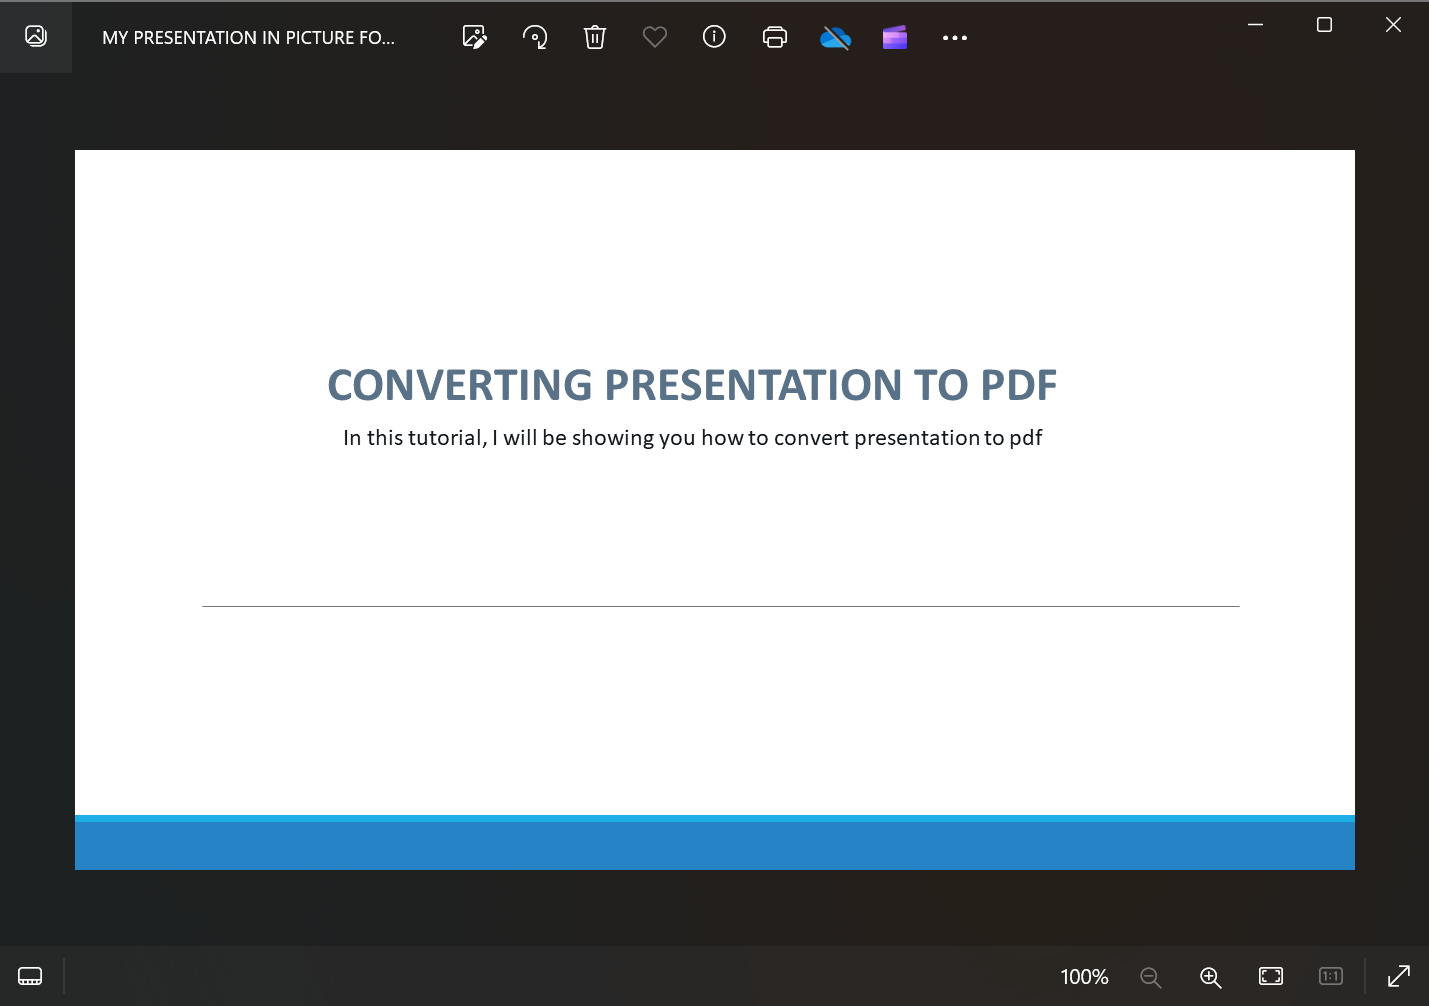 convert-presentation-to-picture